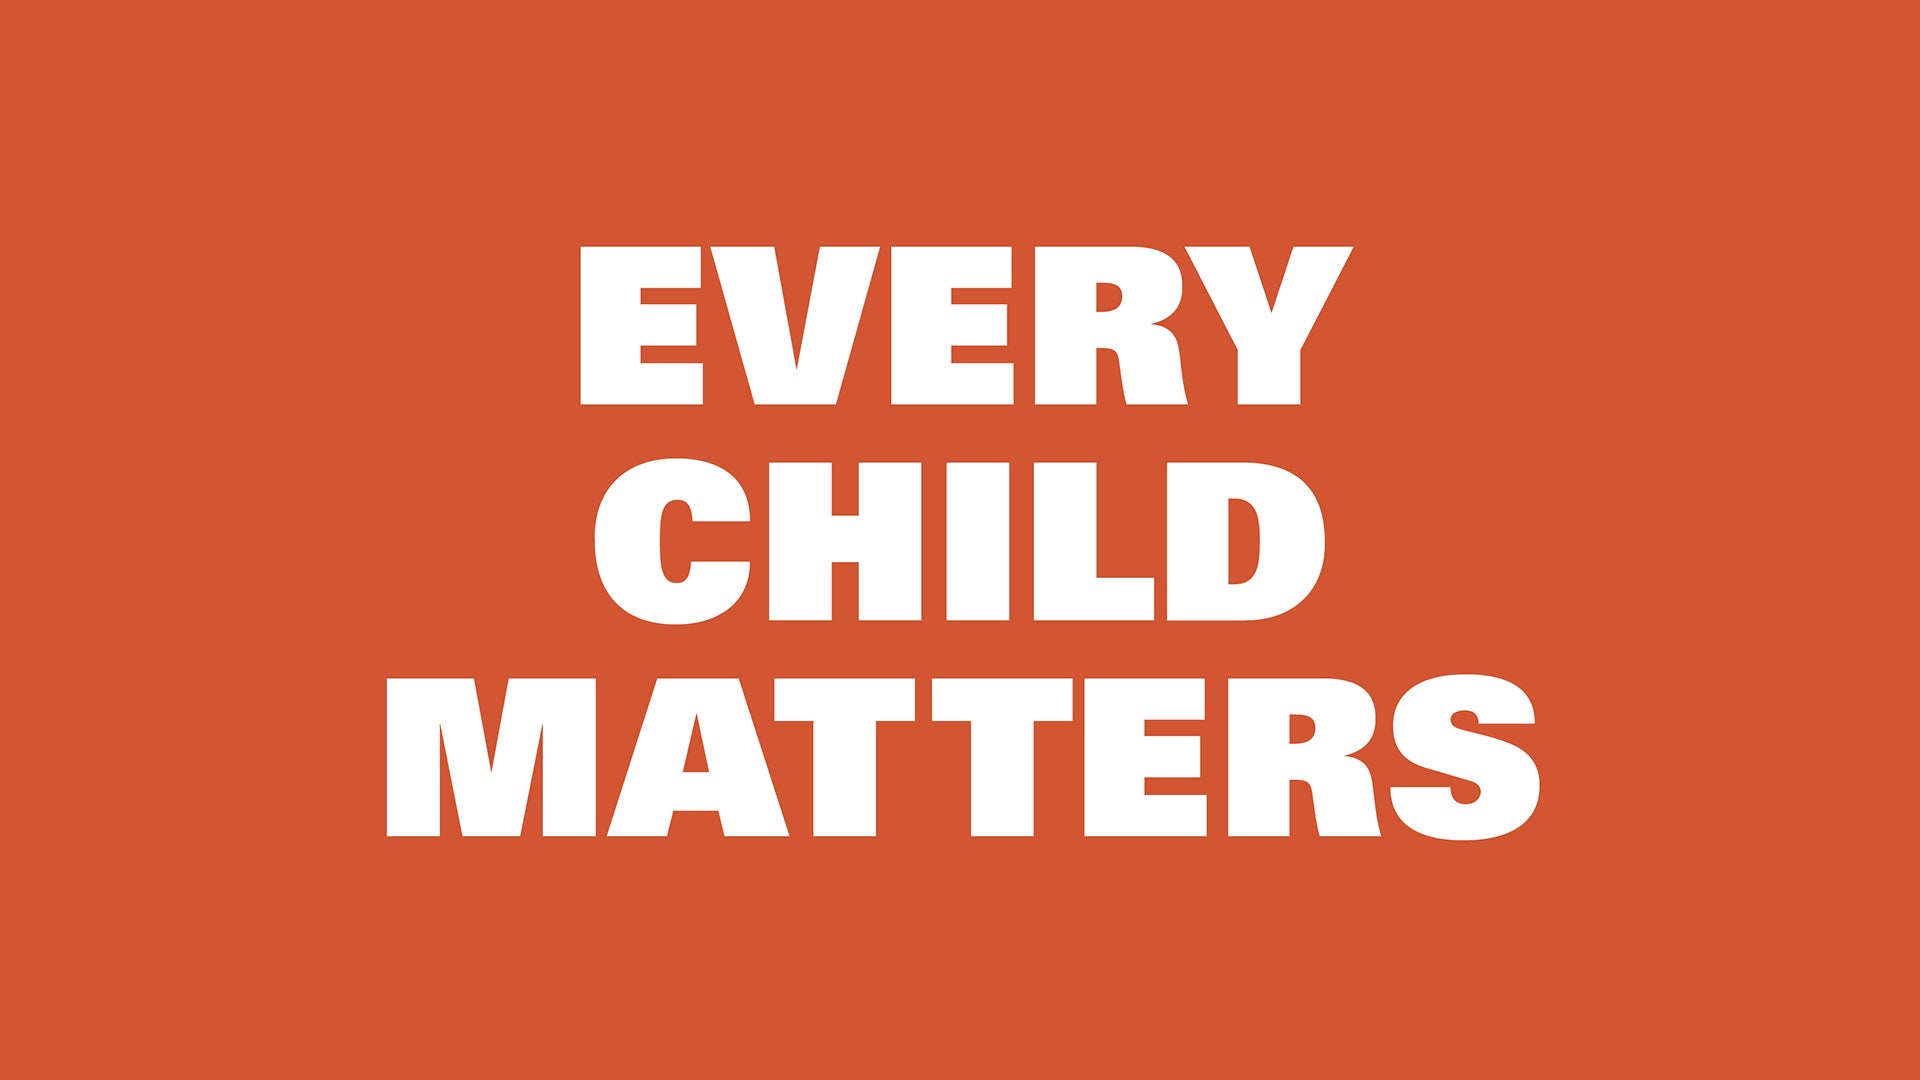 Every Child Matters - Donating Sharpening Proceeds September 25 to October 1